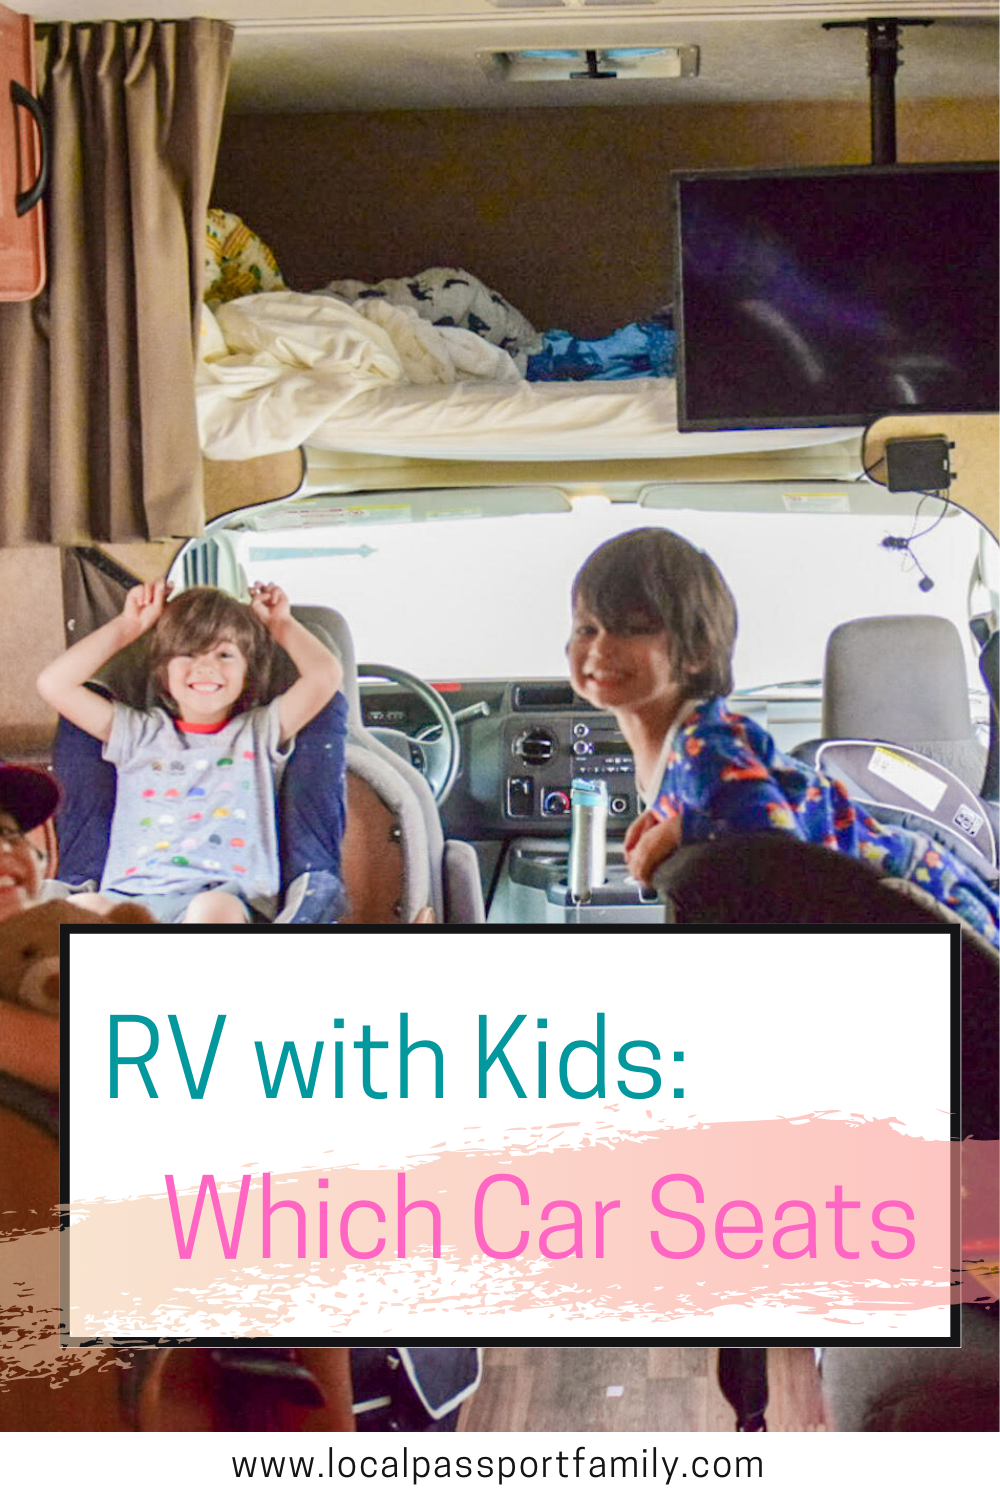 Rv With Kids Which Car Seats Our, How To Get Certified Install Car Seats In Rvs